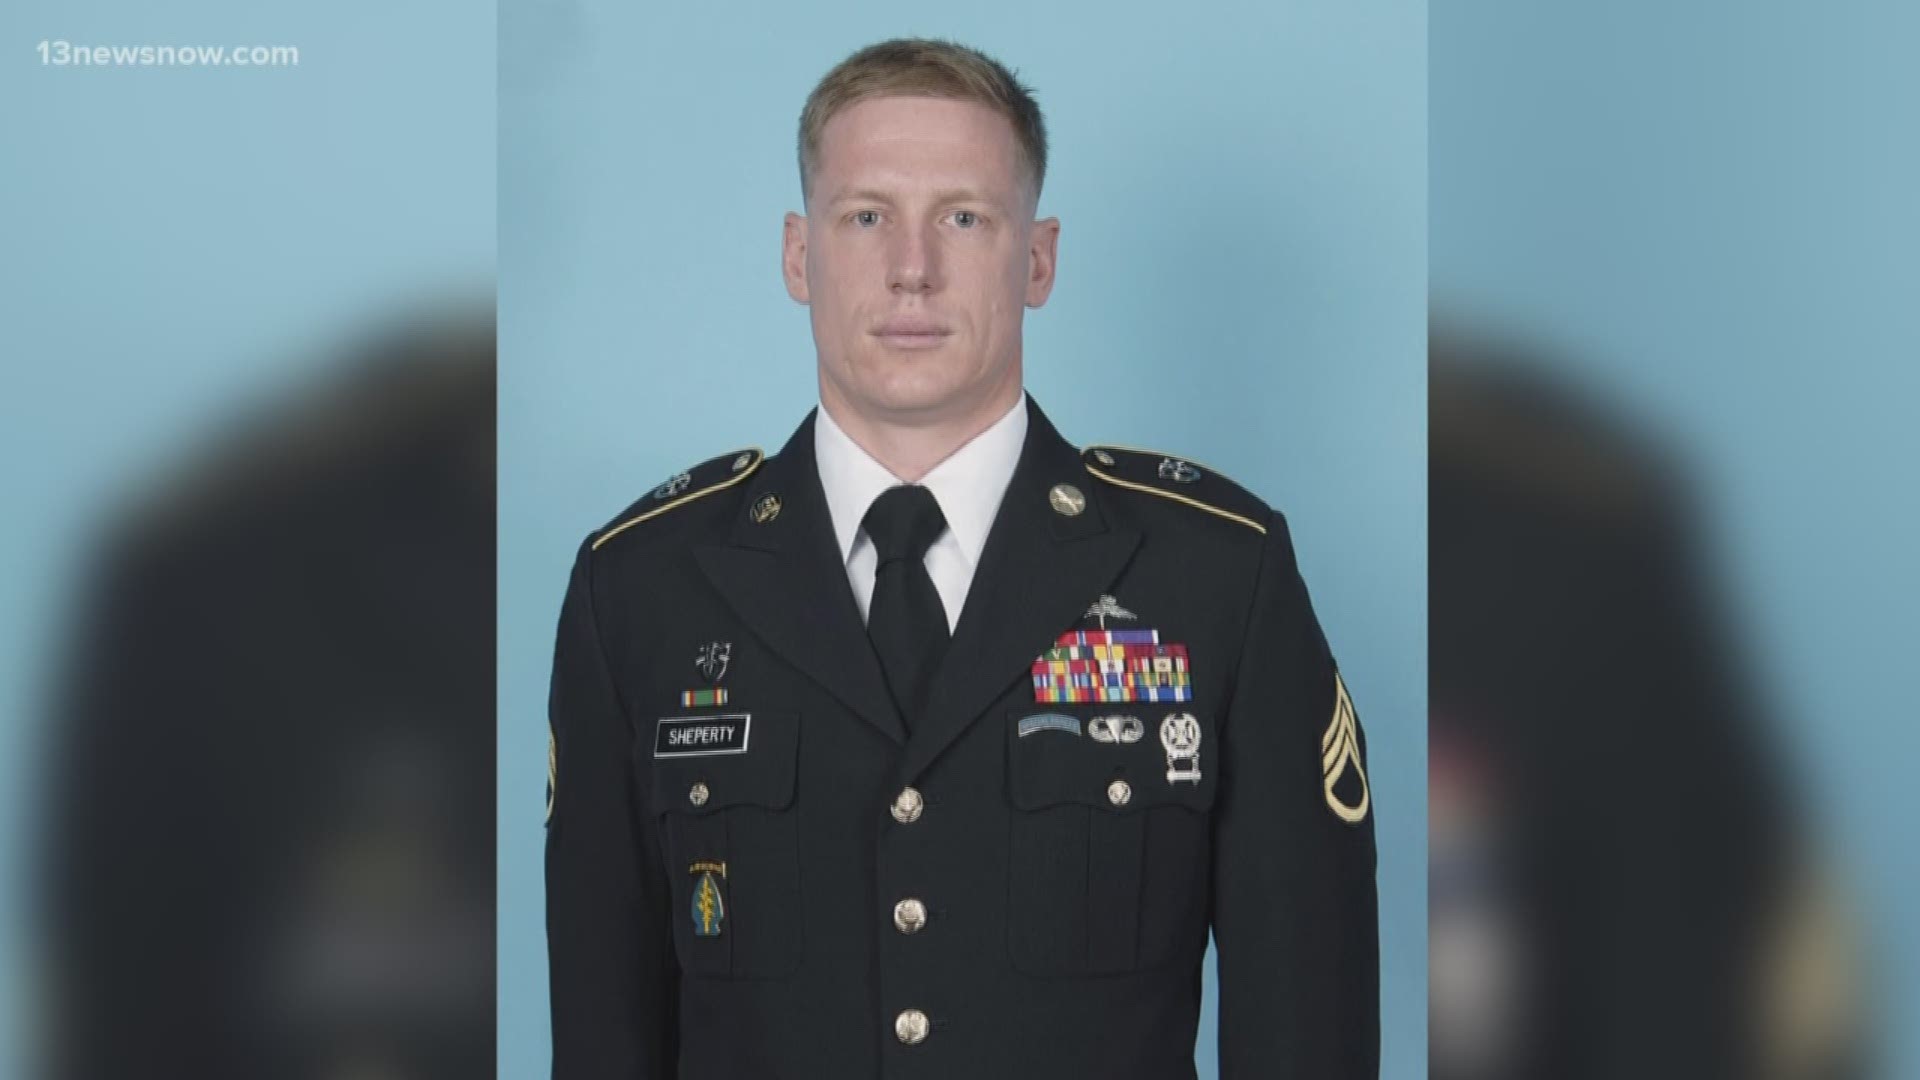 A West Virginia Army National Guard Soldier was part of a military training exercise at the Suffolk Executive Airport when the accident happened. The Green Beret and Virginia native died on the scene.